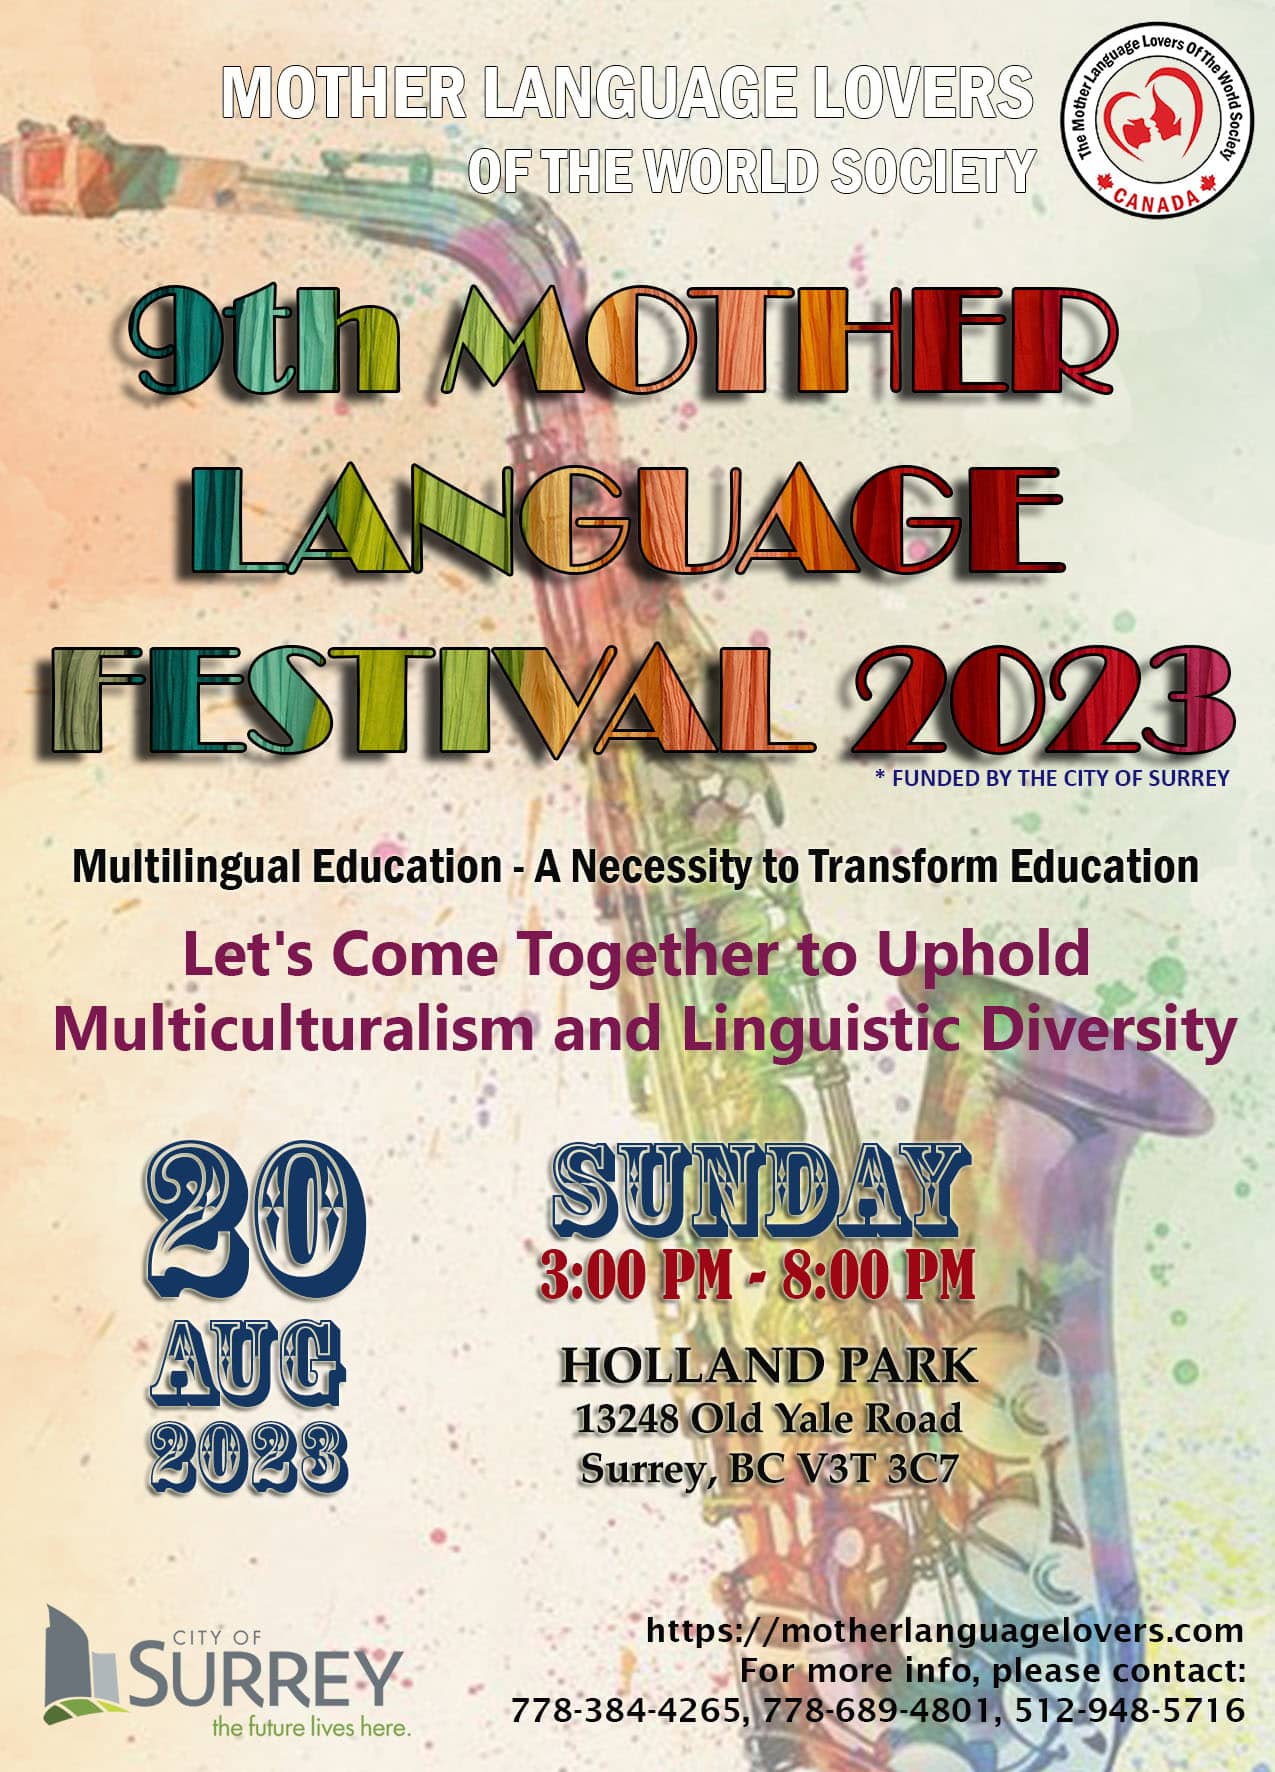 Mother Language of the World this Sunday!